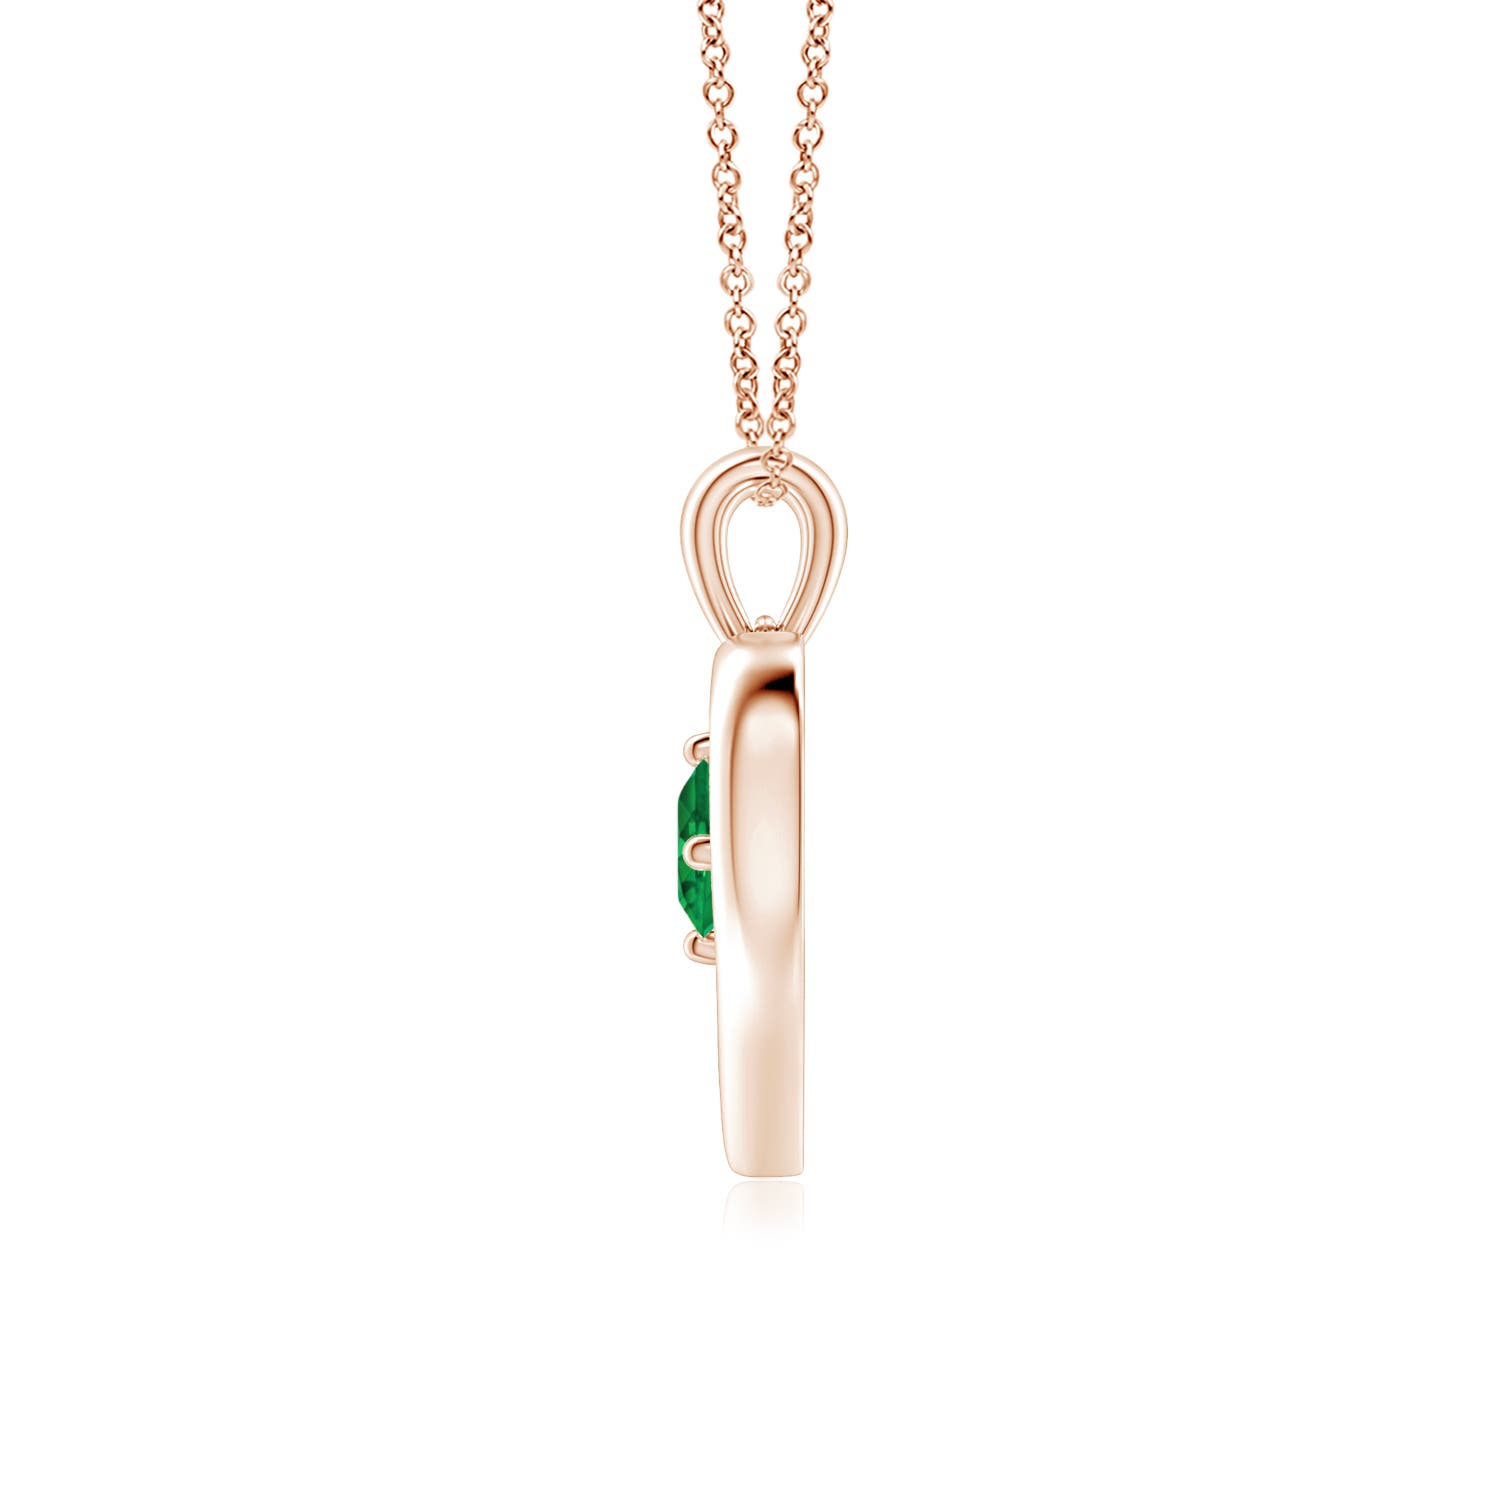 AAA - Emerald / 0.24 CT / 14 KT Rose Gold